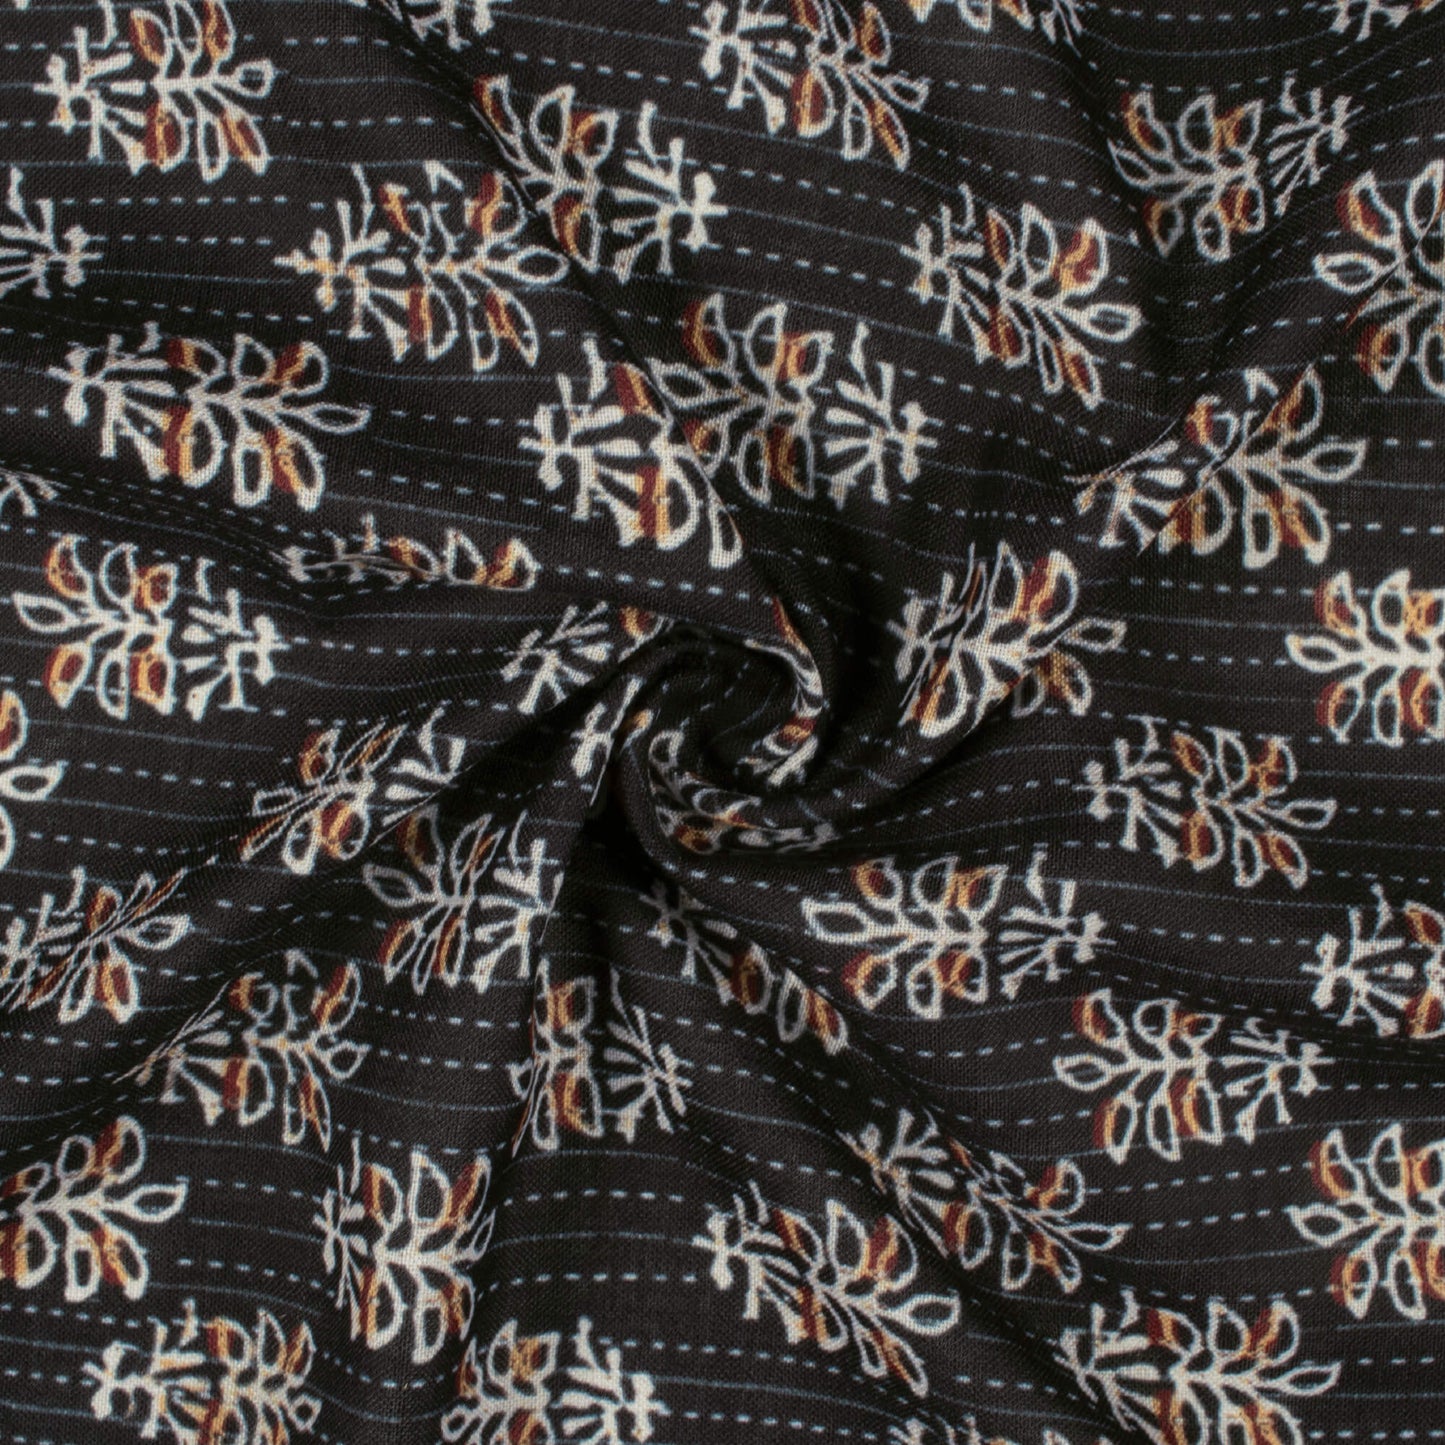 Black And White Ajrakh Pattern Digital Print Linen Textured Fabric (Width 56 Inches)